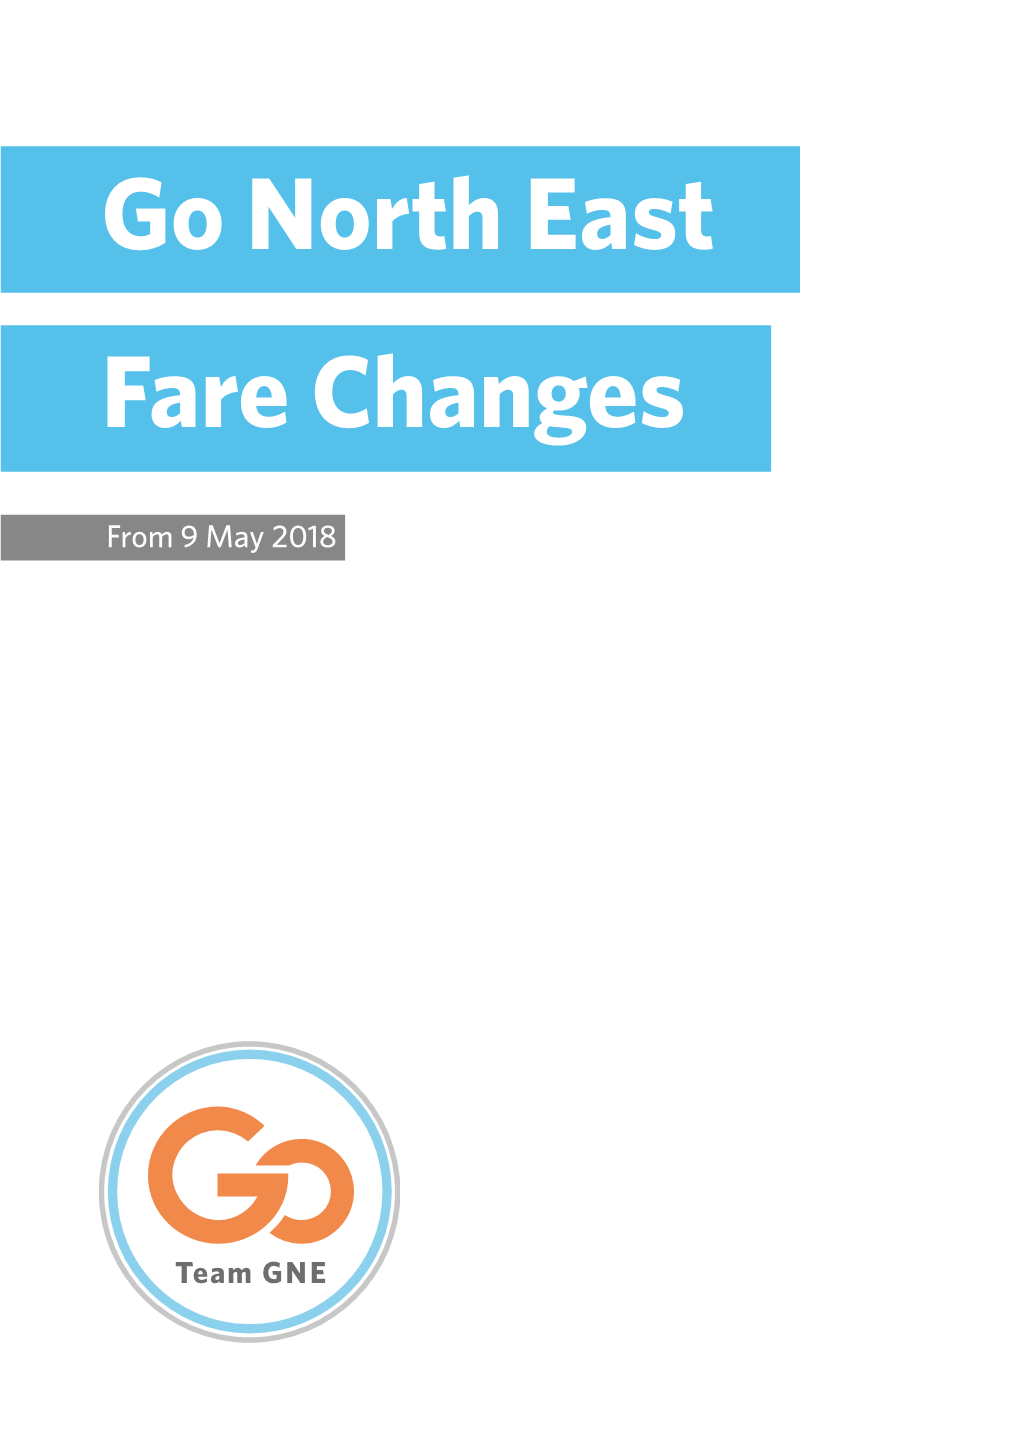 Go North East Fare Changes